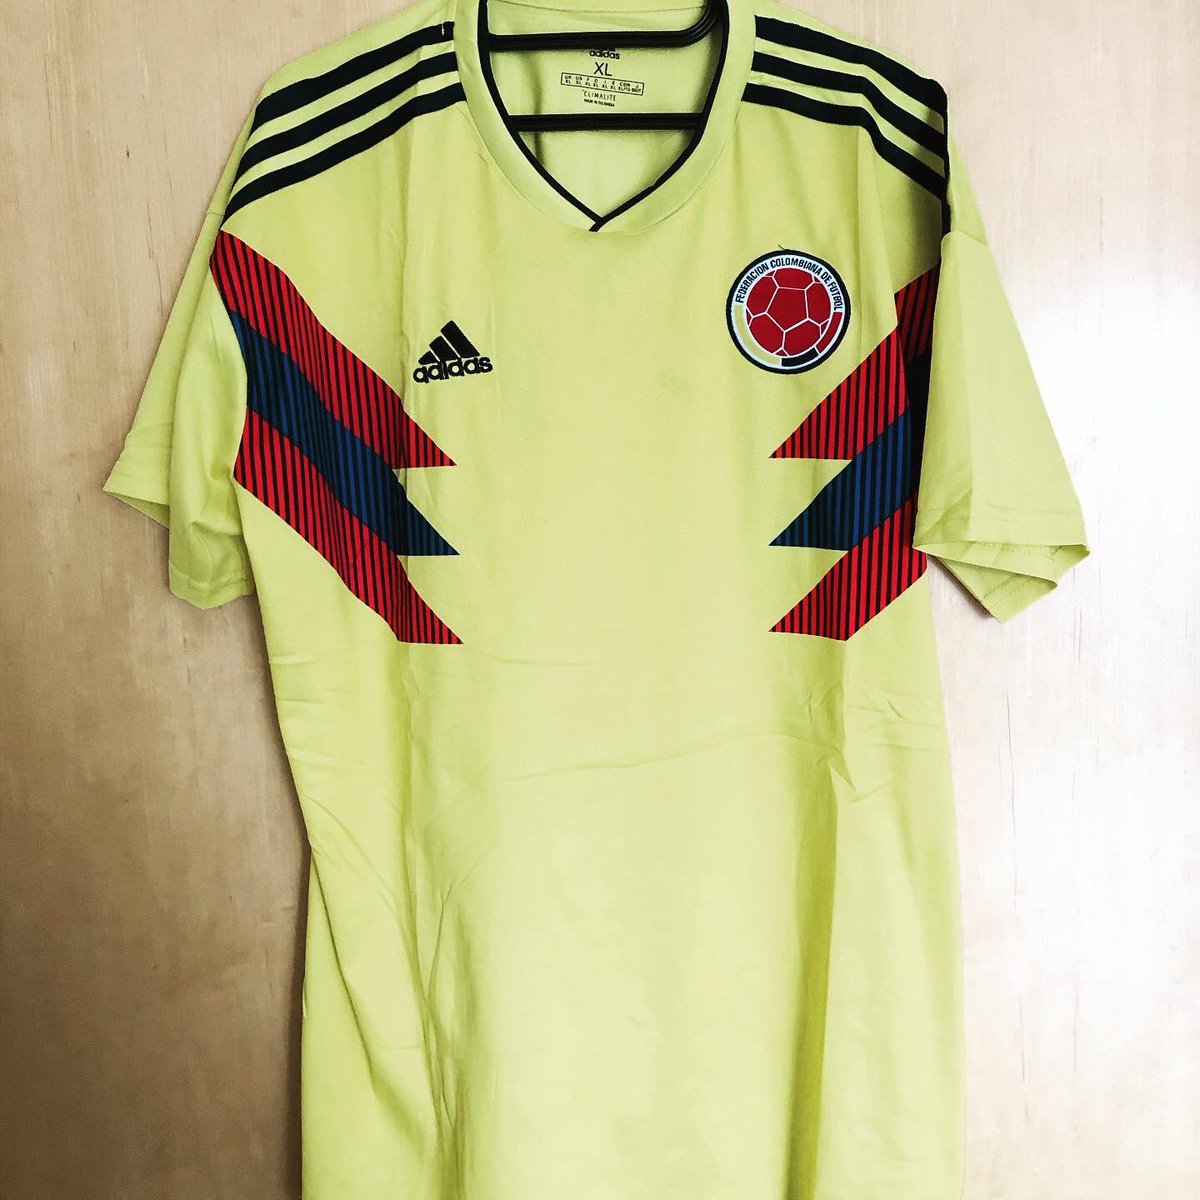 . @FCFSeleccionCol Home Kit, 2018AdidasOne of my favourite shirts of the past World Cup, this one was a lovely present by my good friends Elisa and Davide who brought it back to me from Colombia itself. #ClassicFootballShirts  #FCF  #LosCafeteros  #FootballJerseyCollection